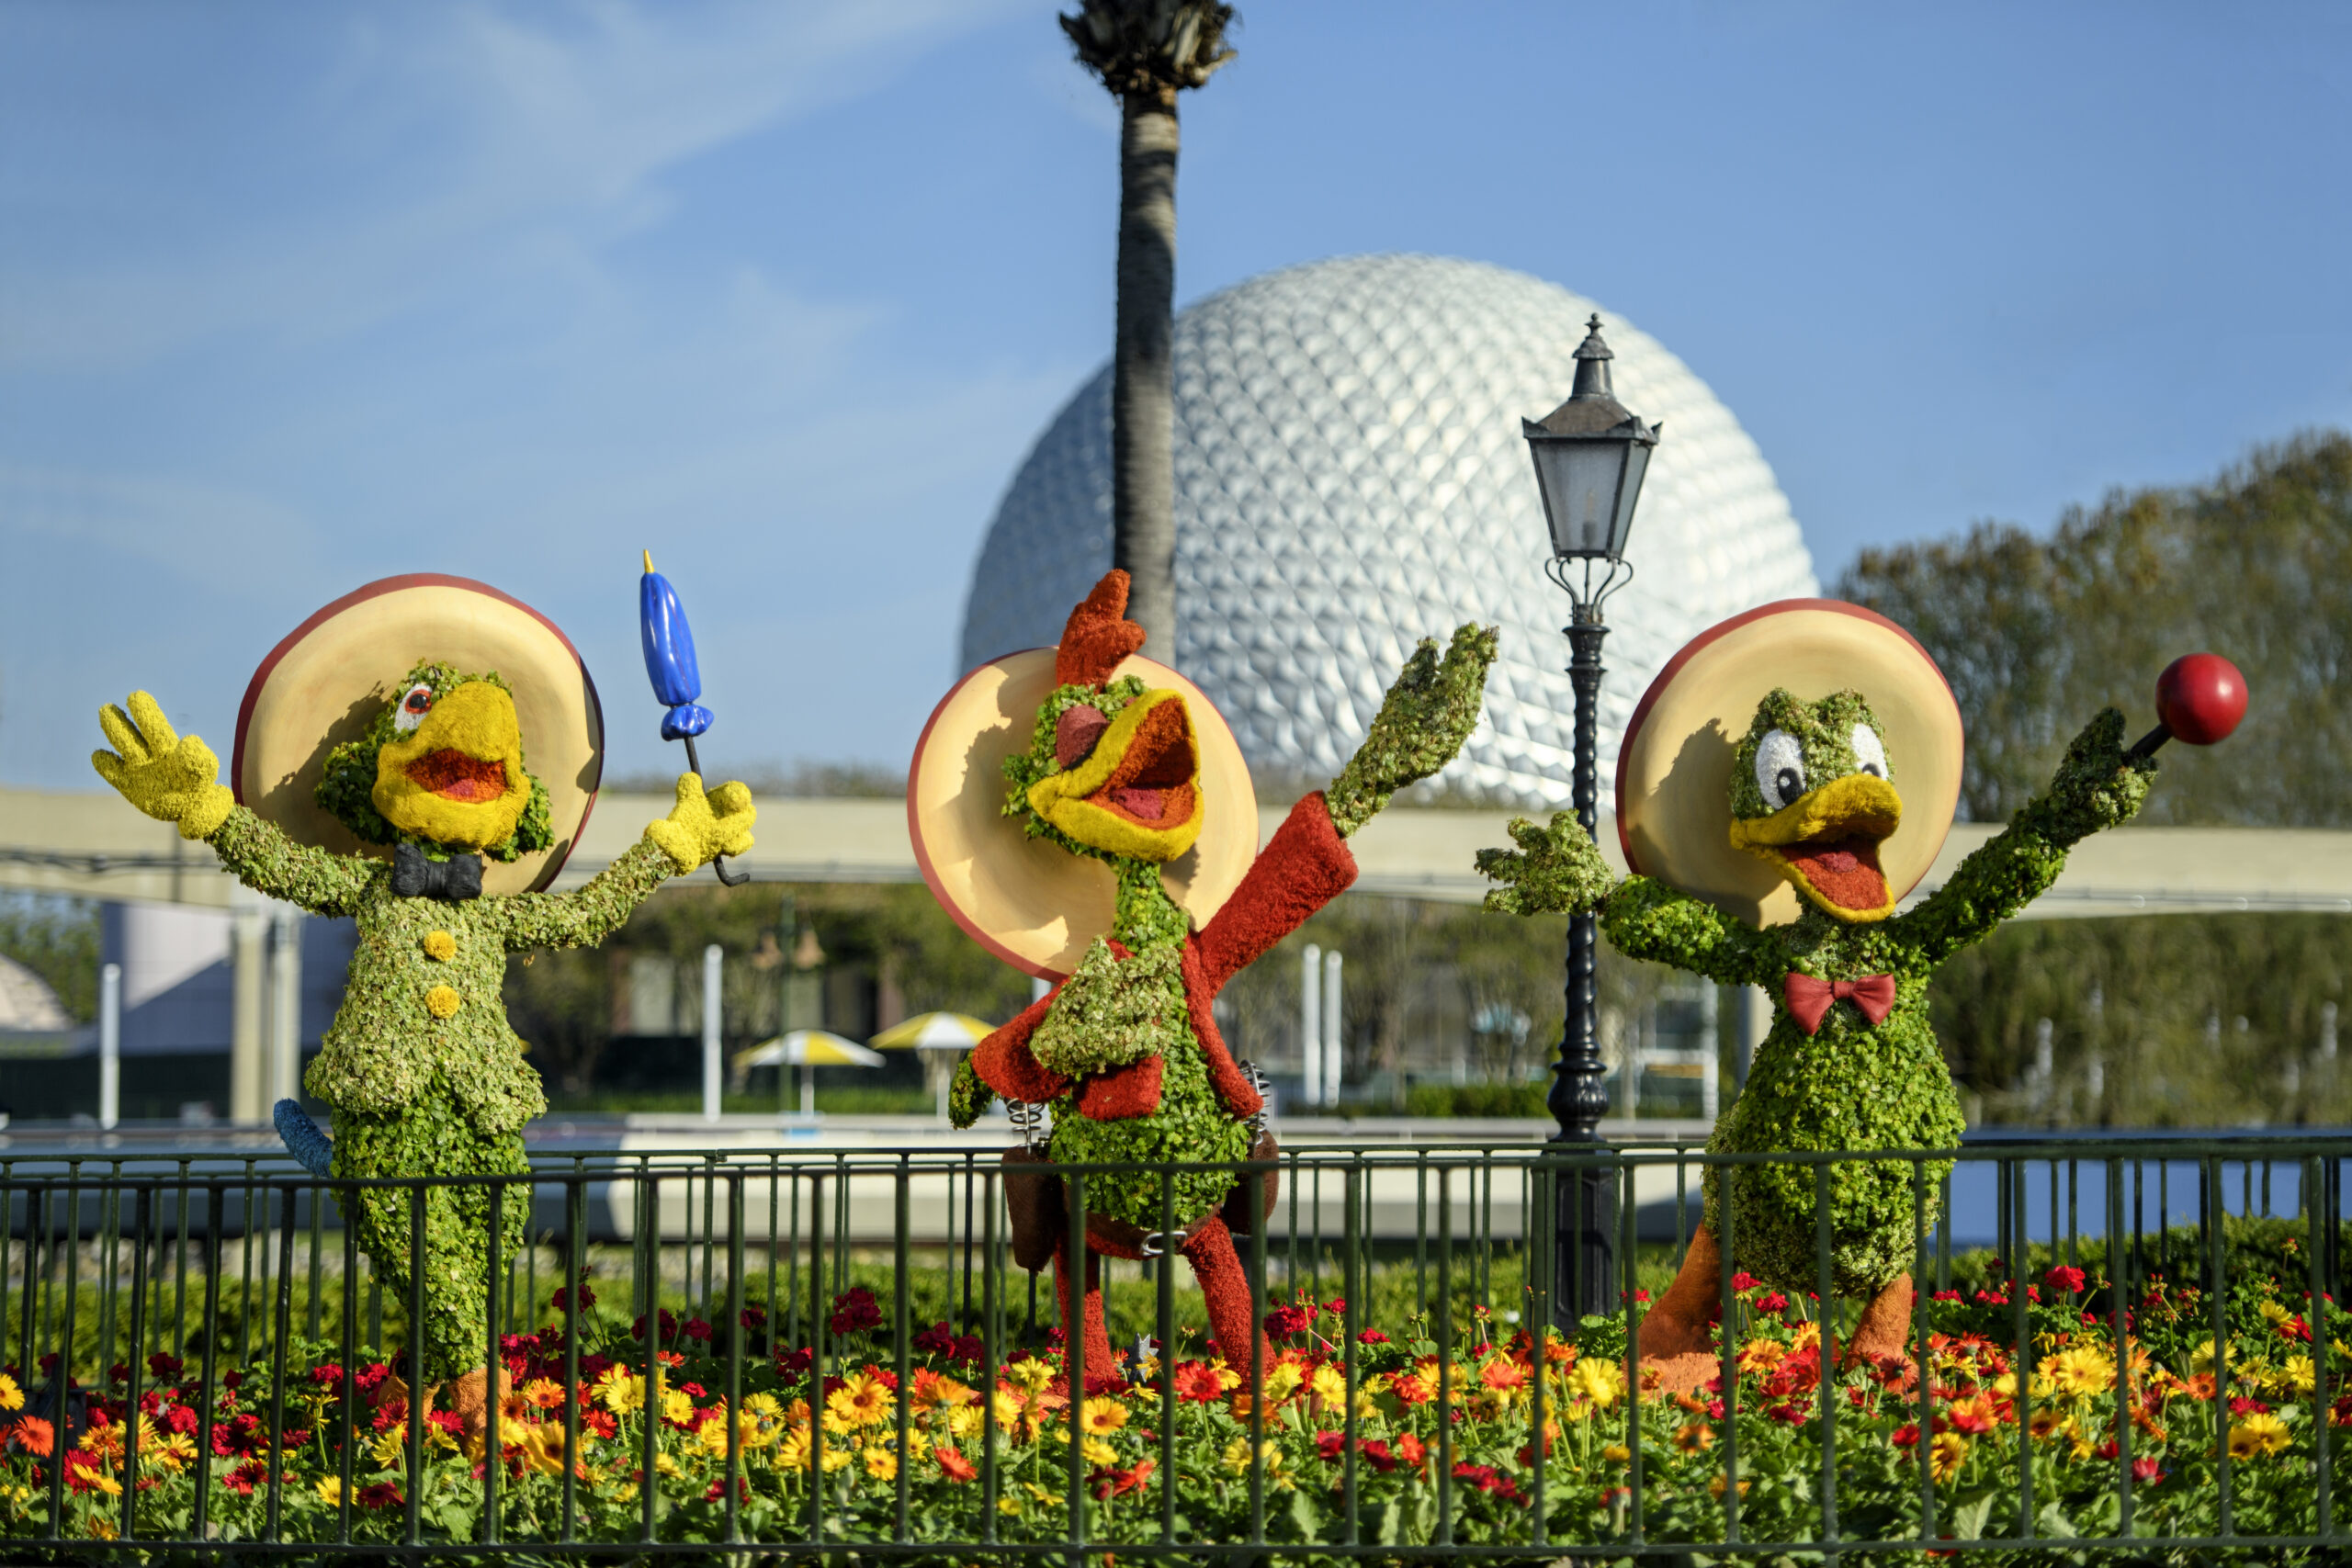 Guide to Character Topiaries at the 2022 EPCOT International Flower & Garden Festival